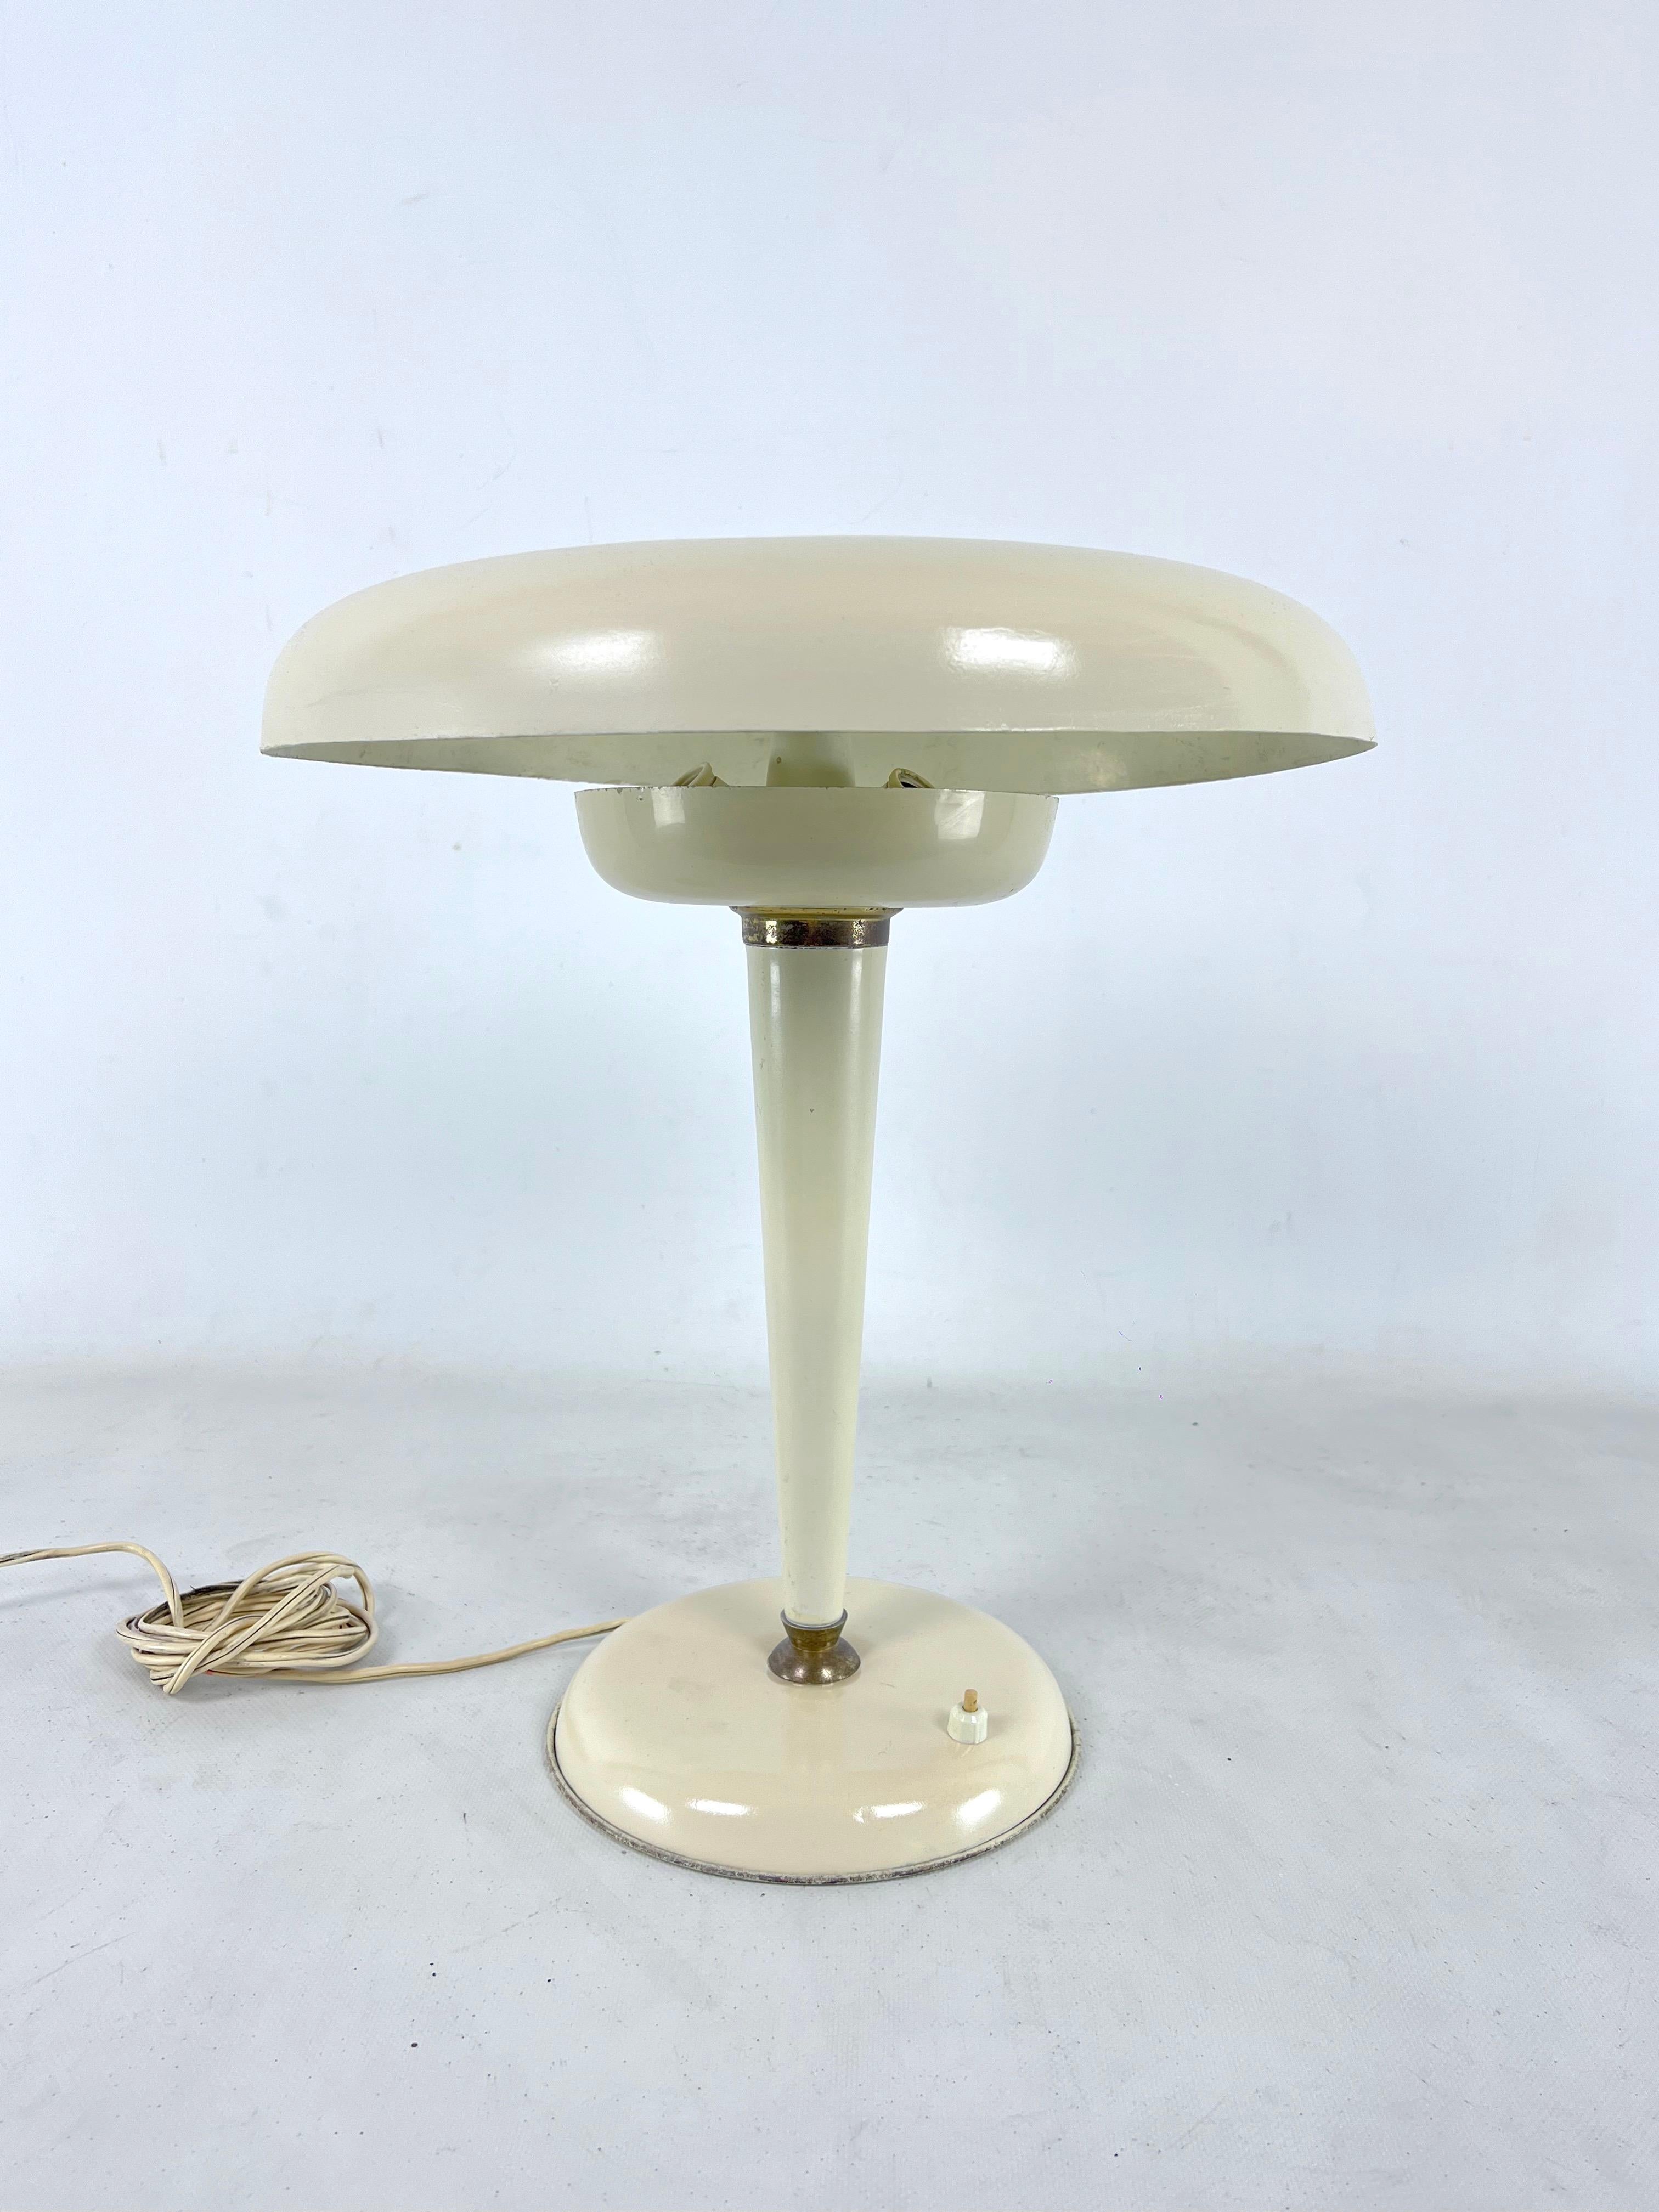 Midcentury Italian Ministerial Desk Lamp in Brass and Ivory Lacquer, Italy, 1950 For Sale 5